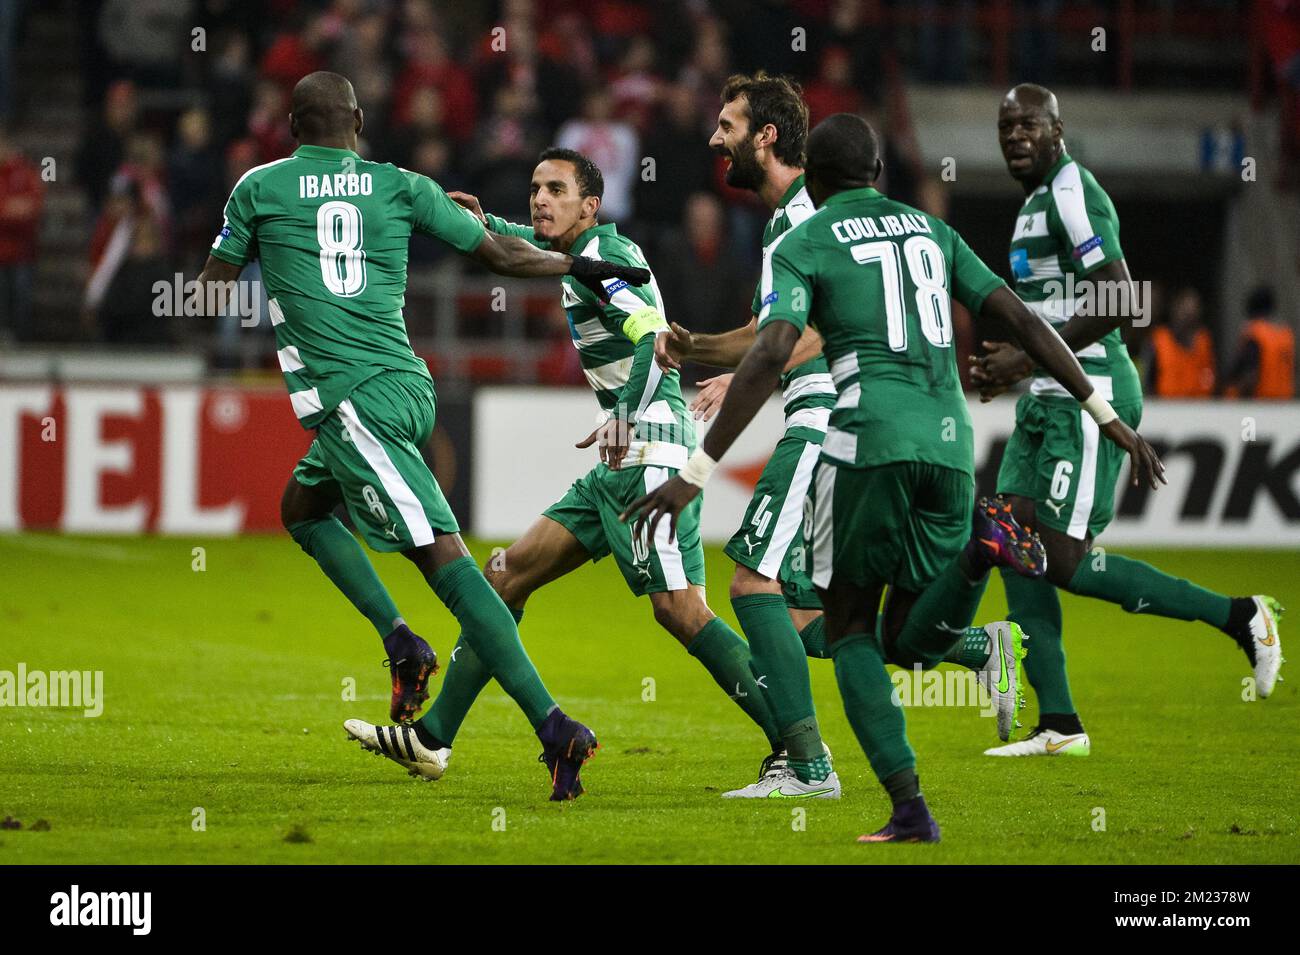 Panathinaikos' forward Victor Ibarbo celebrates after scoring during a third game of the group stage (group G) of the Europa League competition between Belgian soccer team Standard de Liege and Greek soccer team Panathinaikos, Thursday 20 October 2016, in Liege. BELGA PHOTO NICOLAS LAMBERT Stock Photo